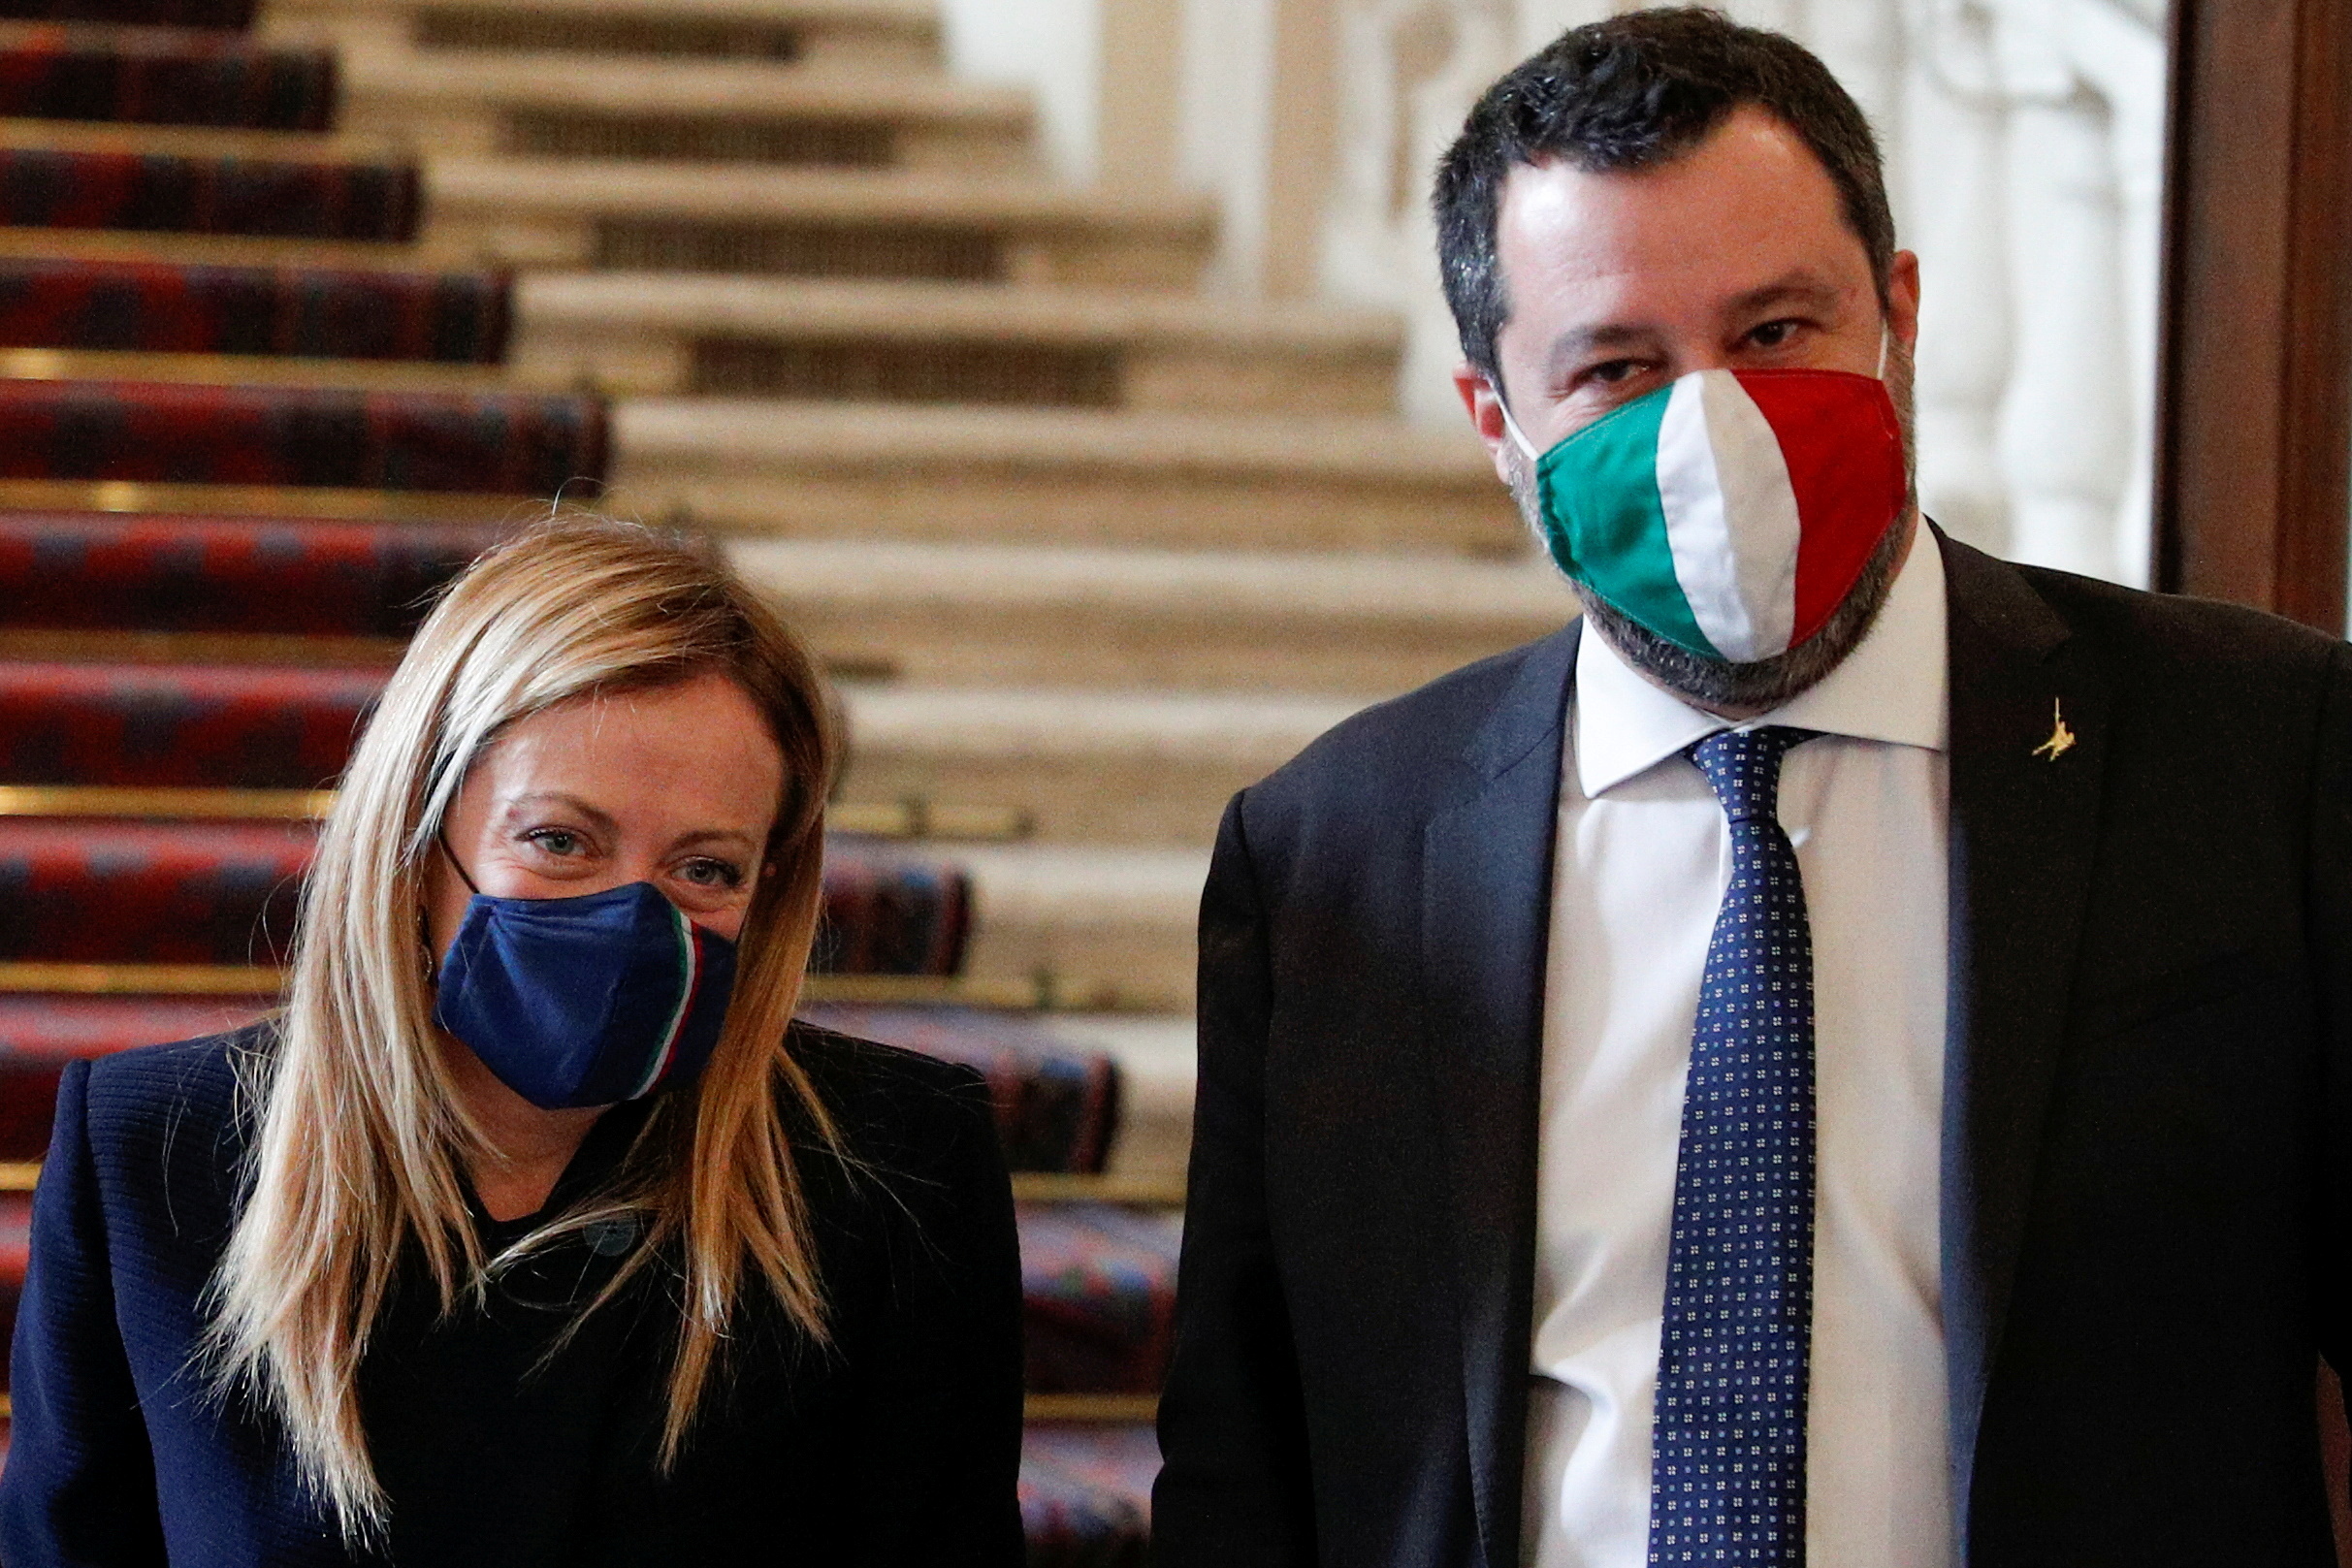 Brothers of Italy leader Giorgia Meloni and League party leader Matteo Salvini leave after a meeting with Italian President Sergio Mattarella at the Quirinale Palace in Rome